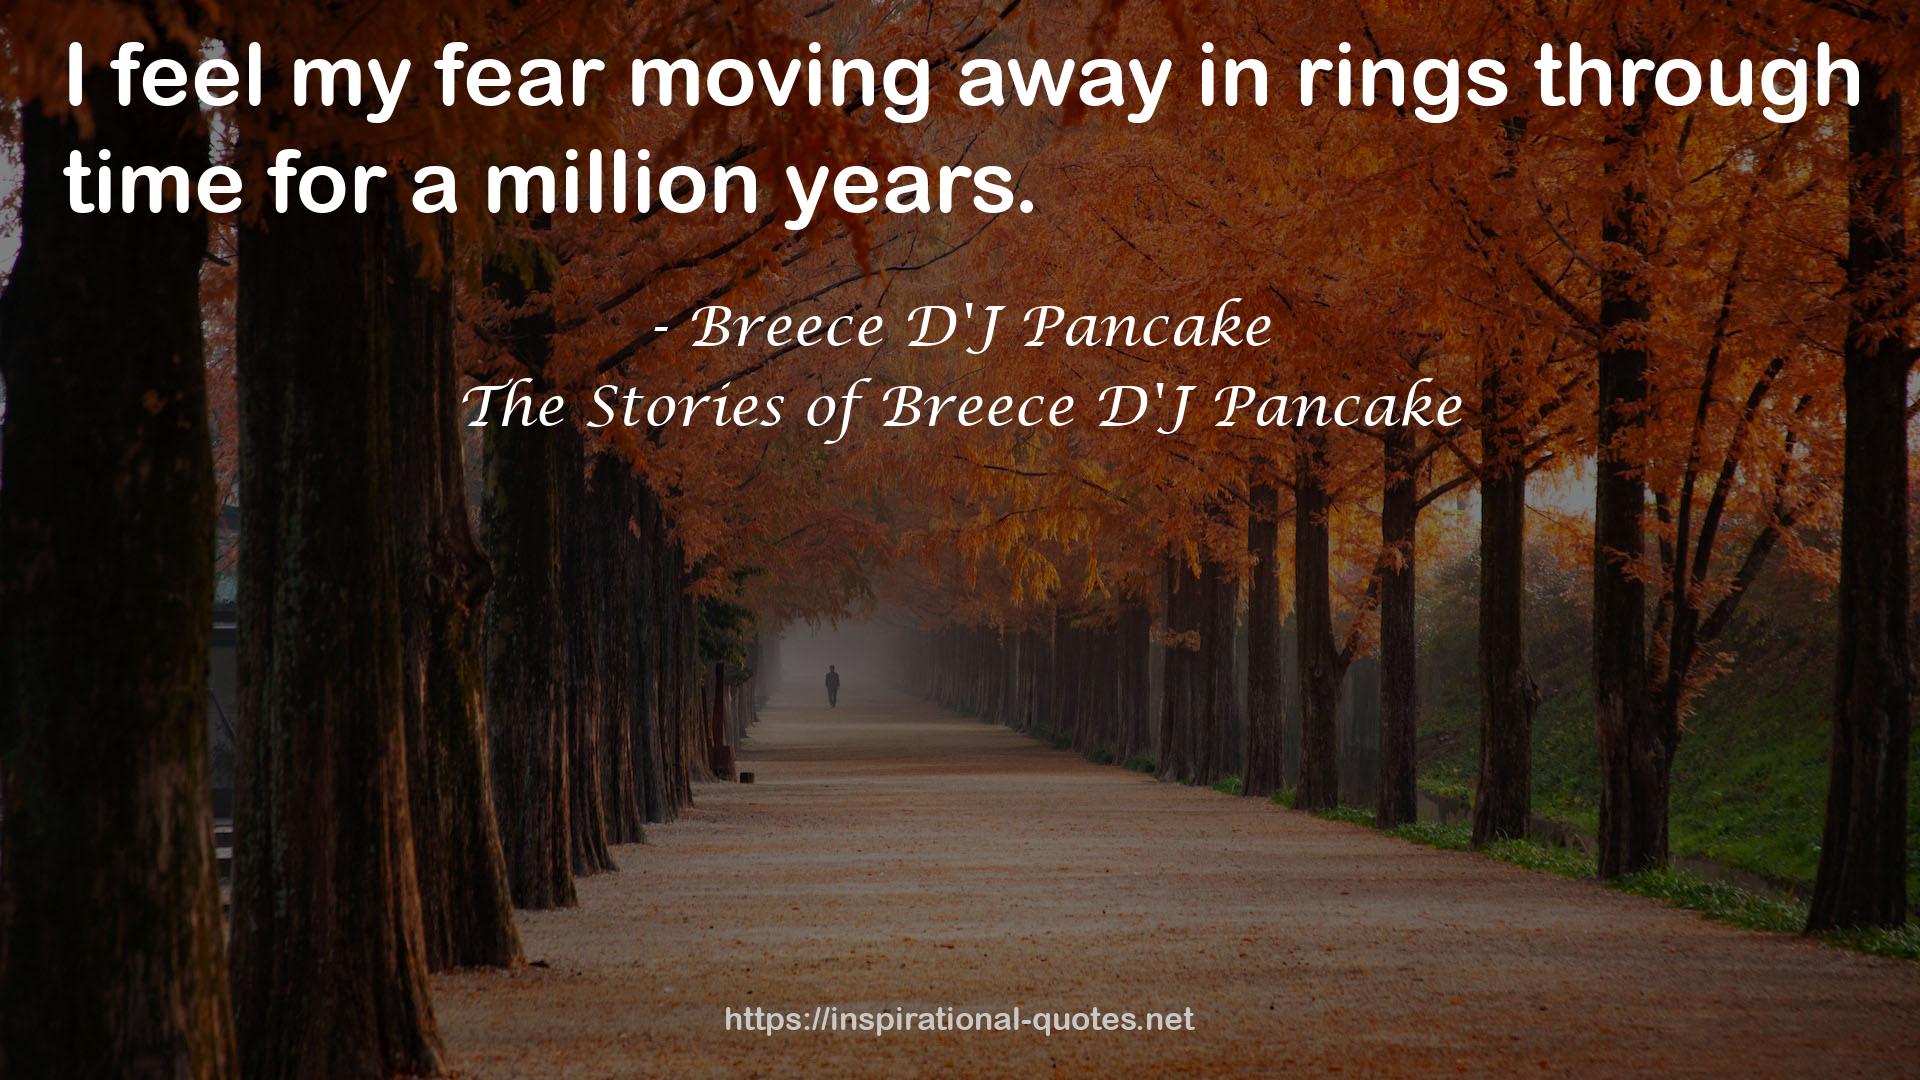 The Stories of Breece D'J Pancake QUOTES